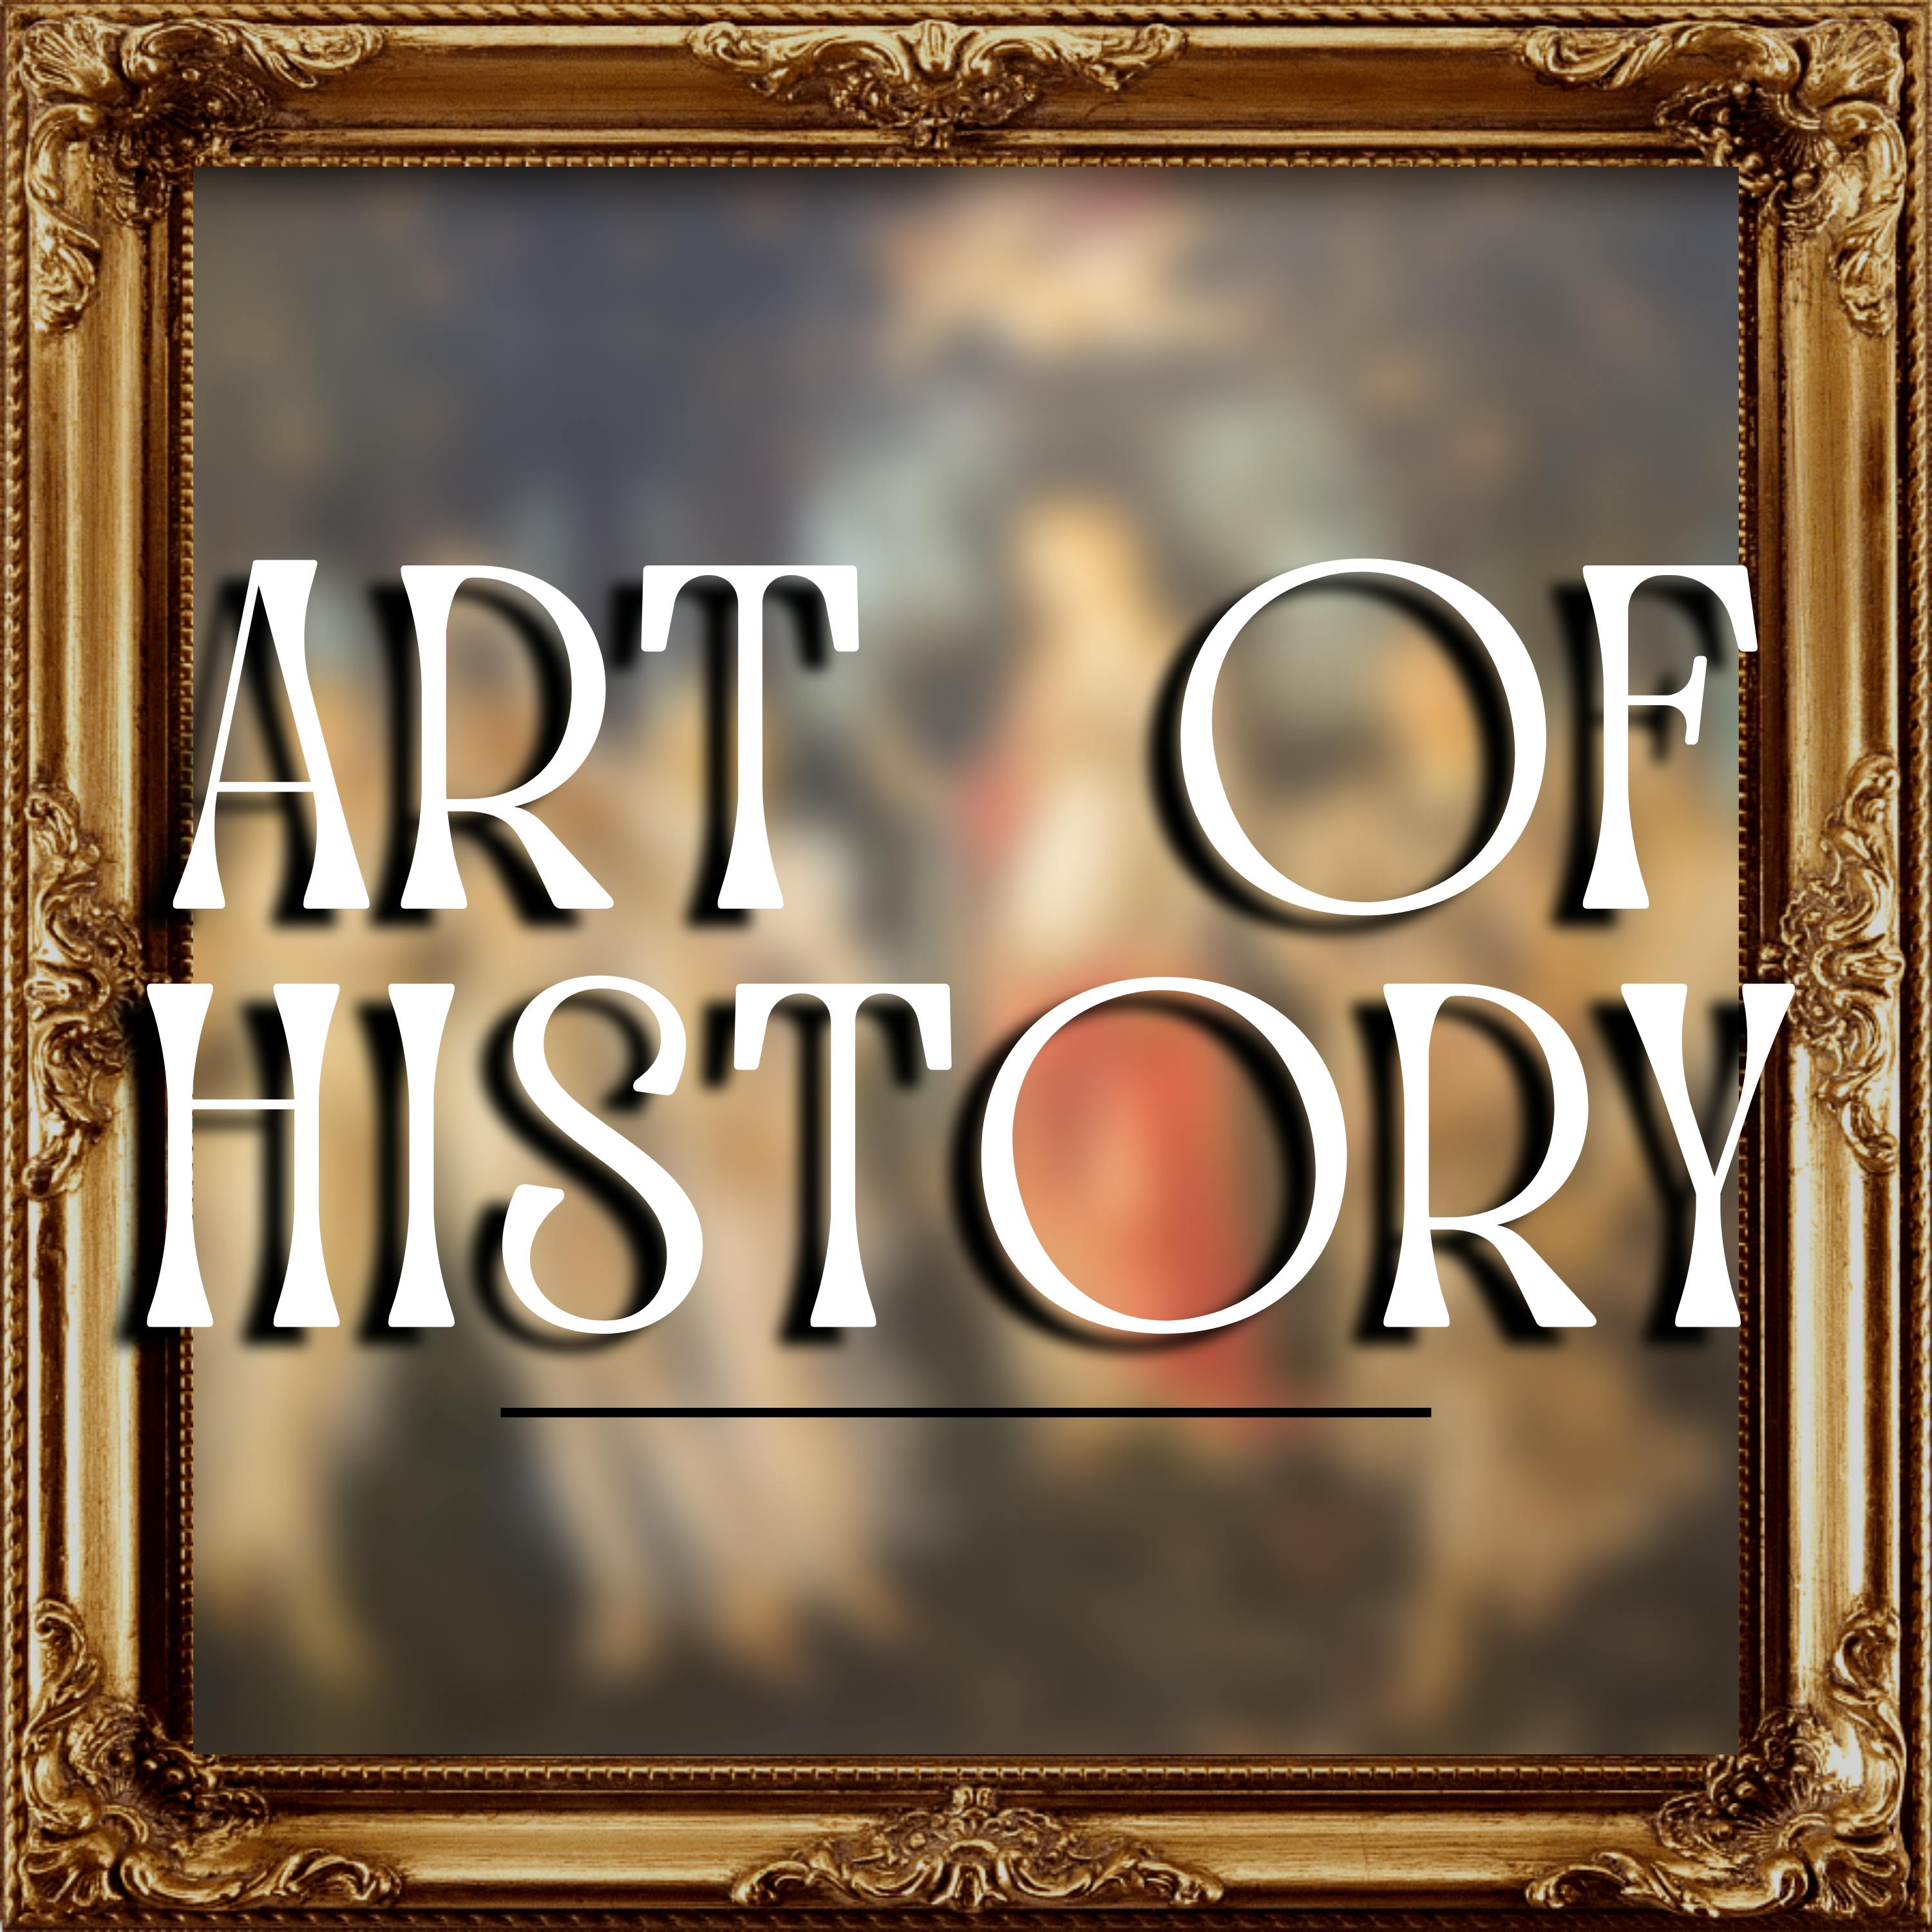 Introducing: Art of History